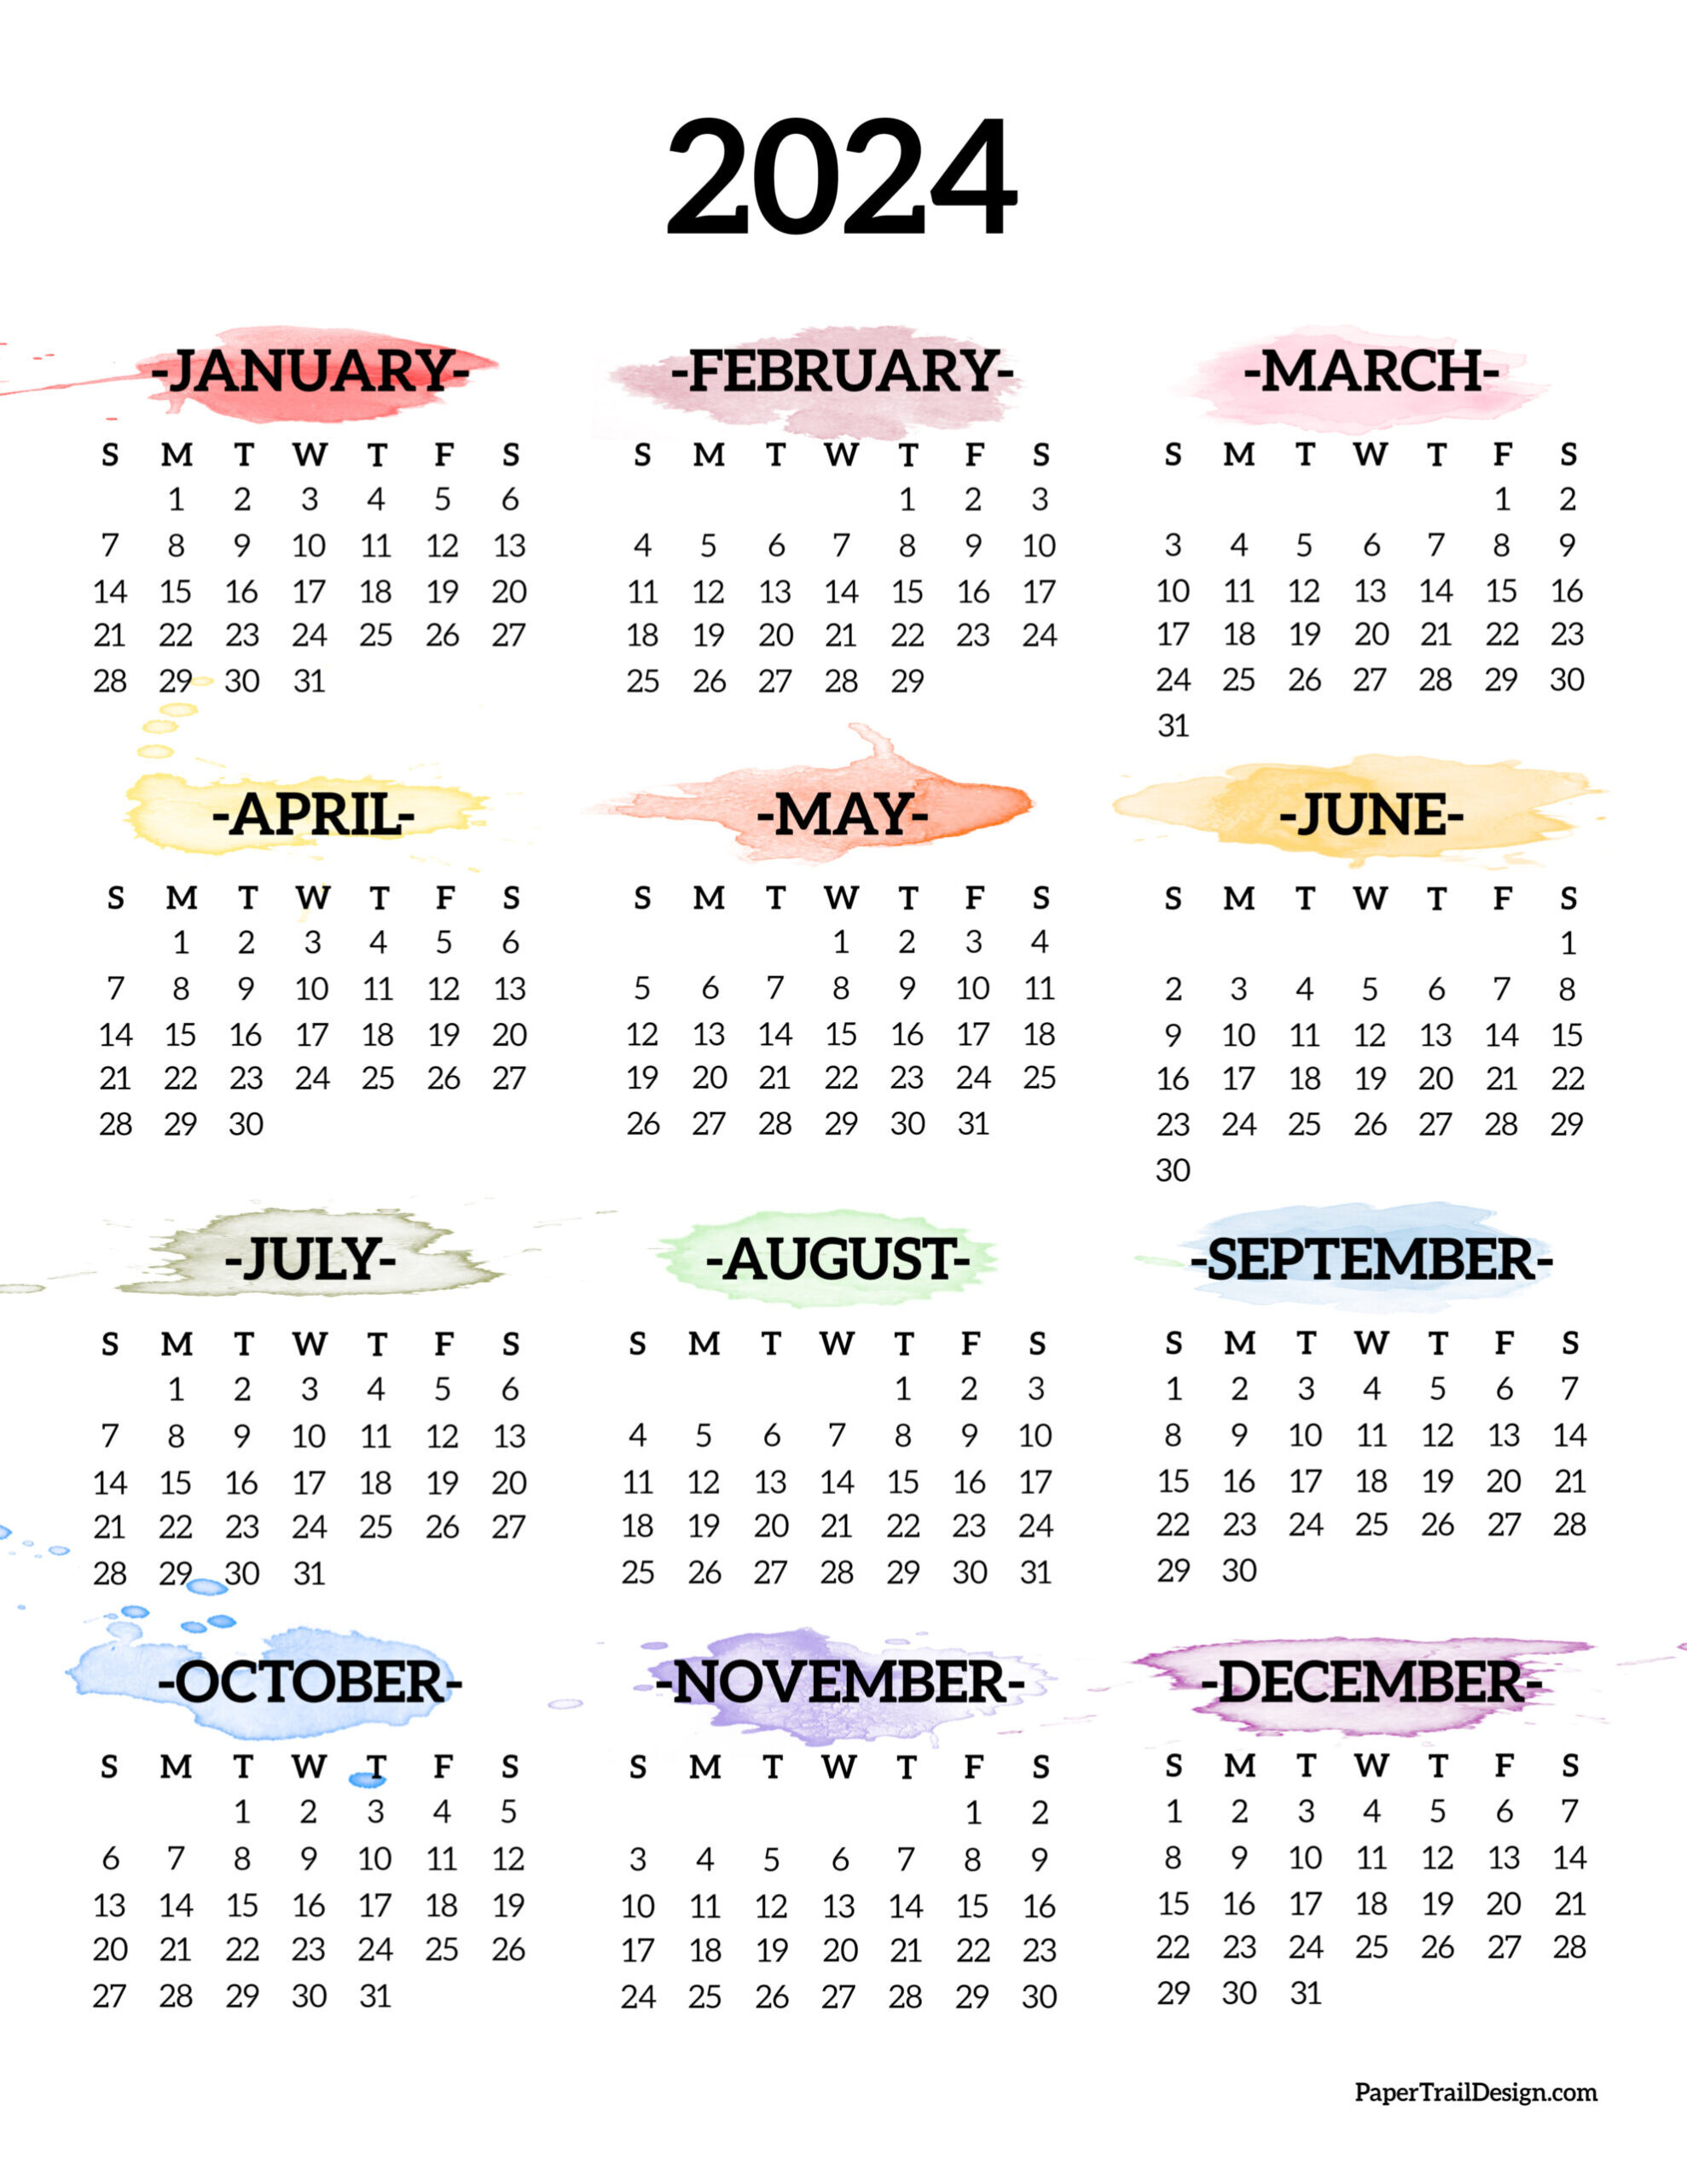 Calendar 2024 Printable One Page - Paper Trail Design for Free Printable Calendar 2024 One Page